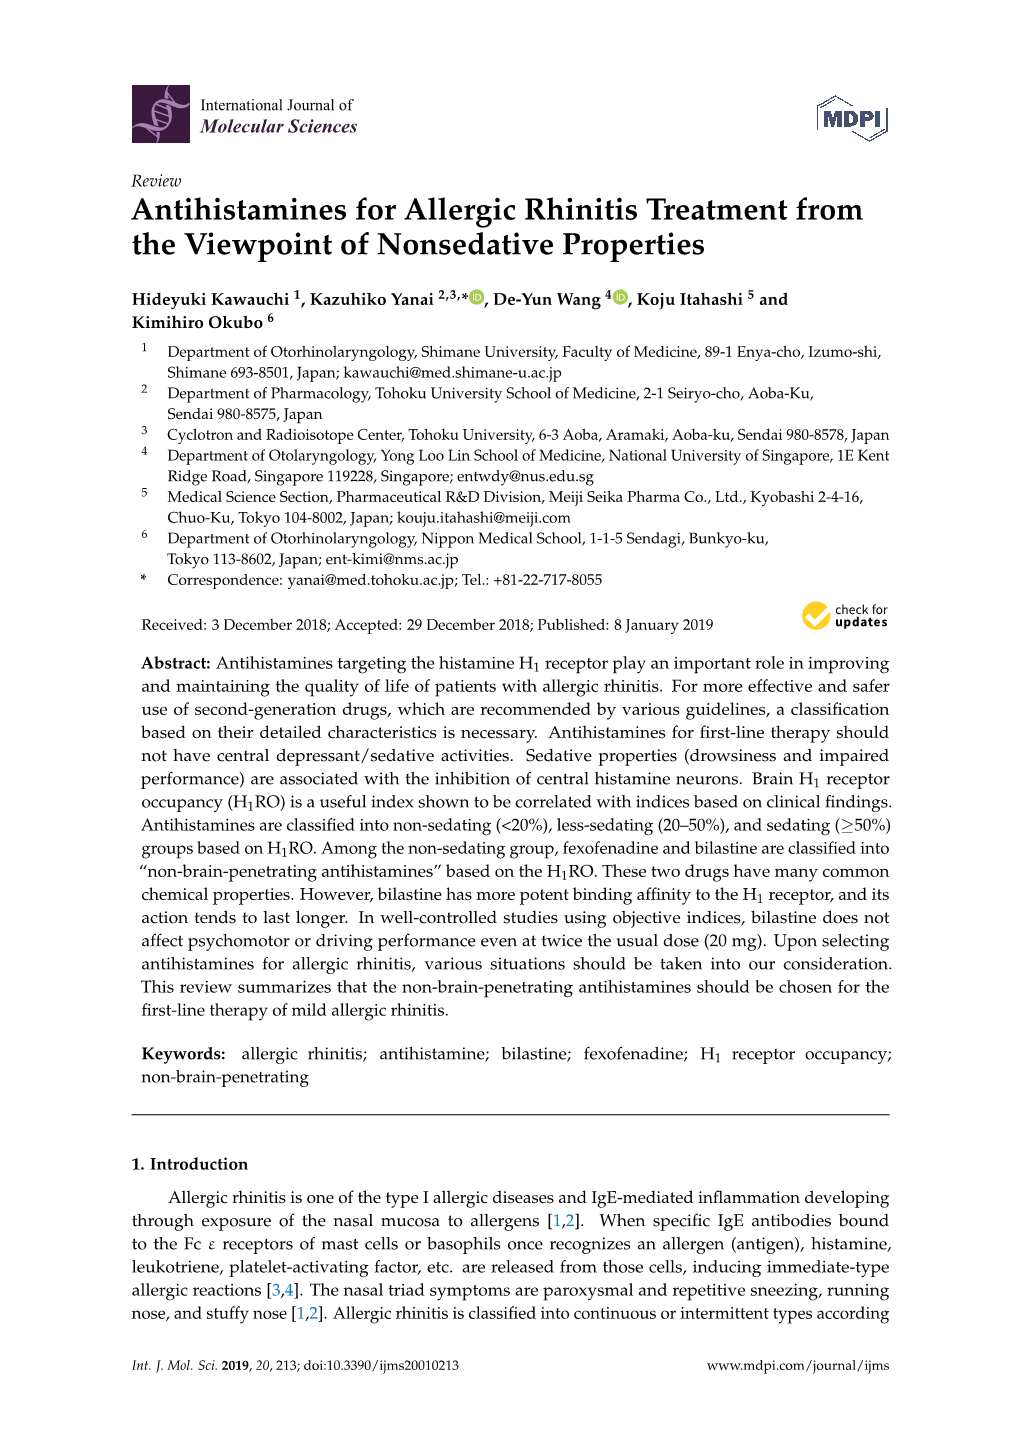 Antihistamines for Allergic Rhinitis Treatment from the Viewpoint of Nonsedative Properties